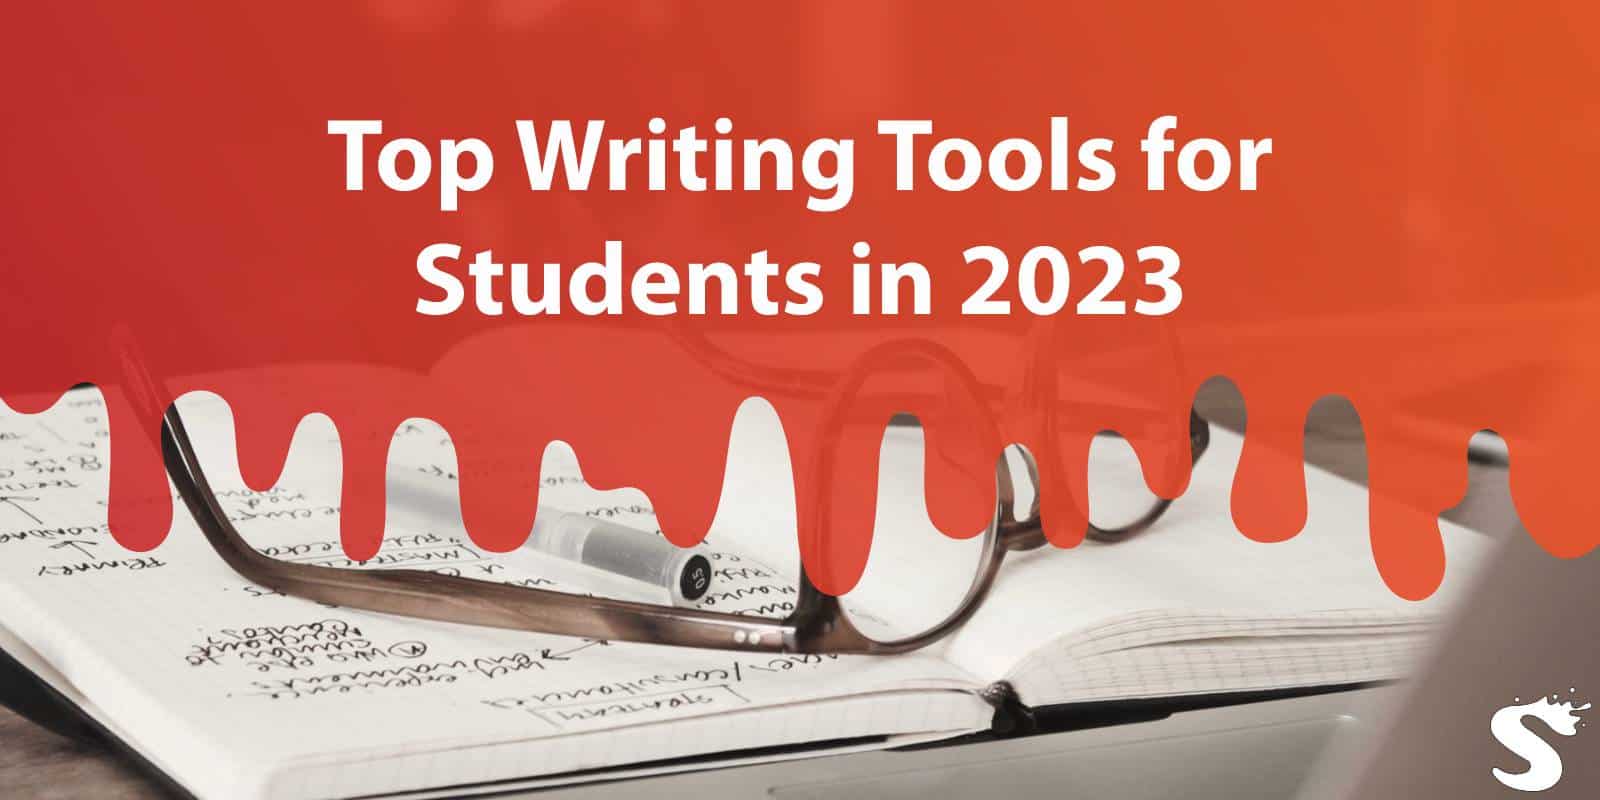 Top Four Writing Tools for Students in 2023